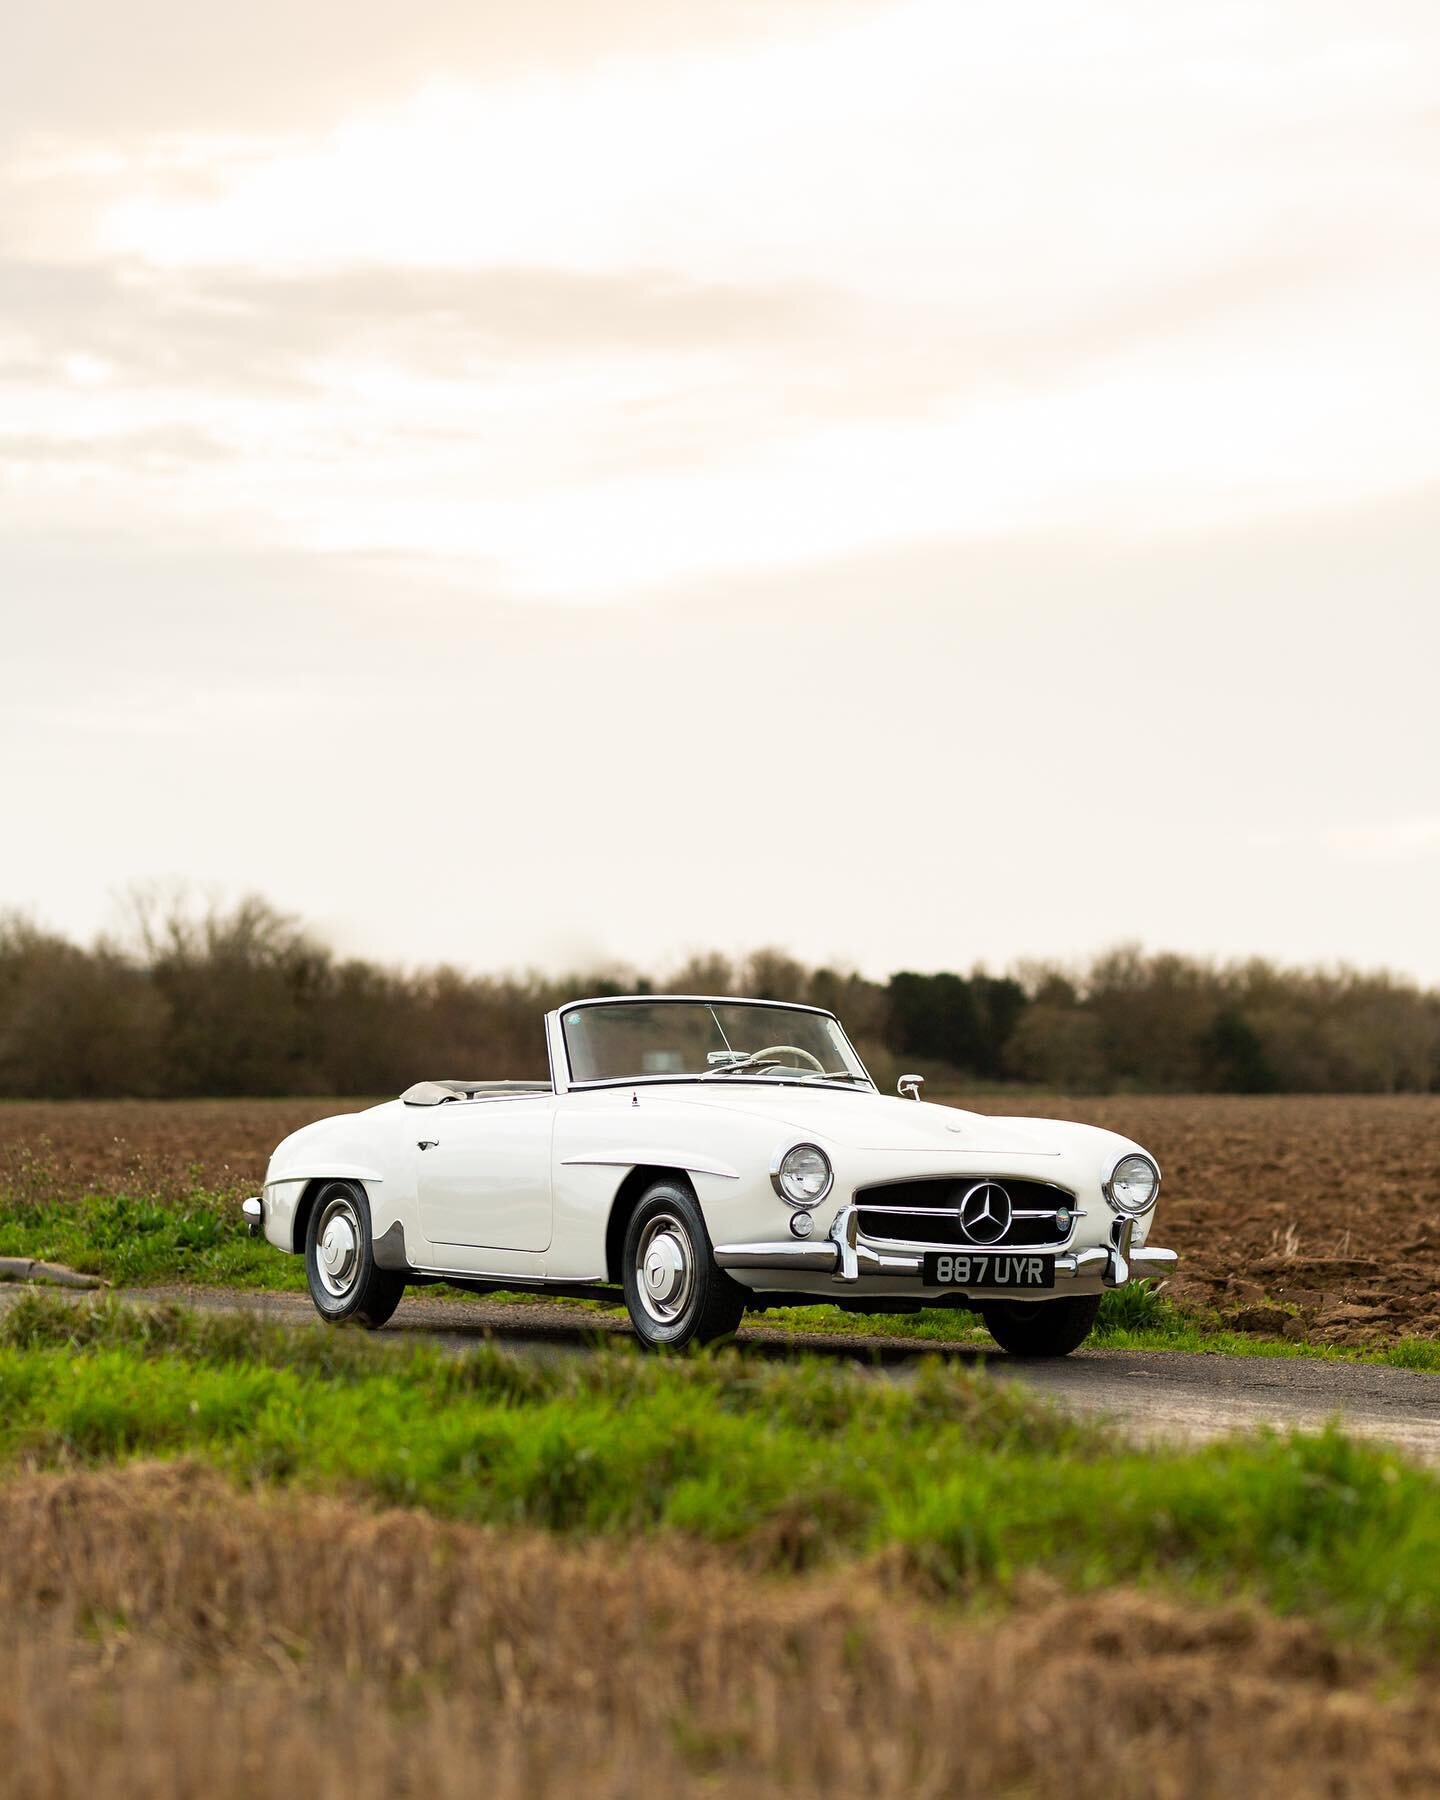 Welcome back! This stunning and highly original 190SL is now on our website!